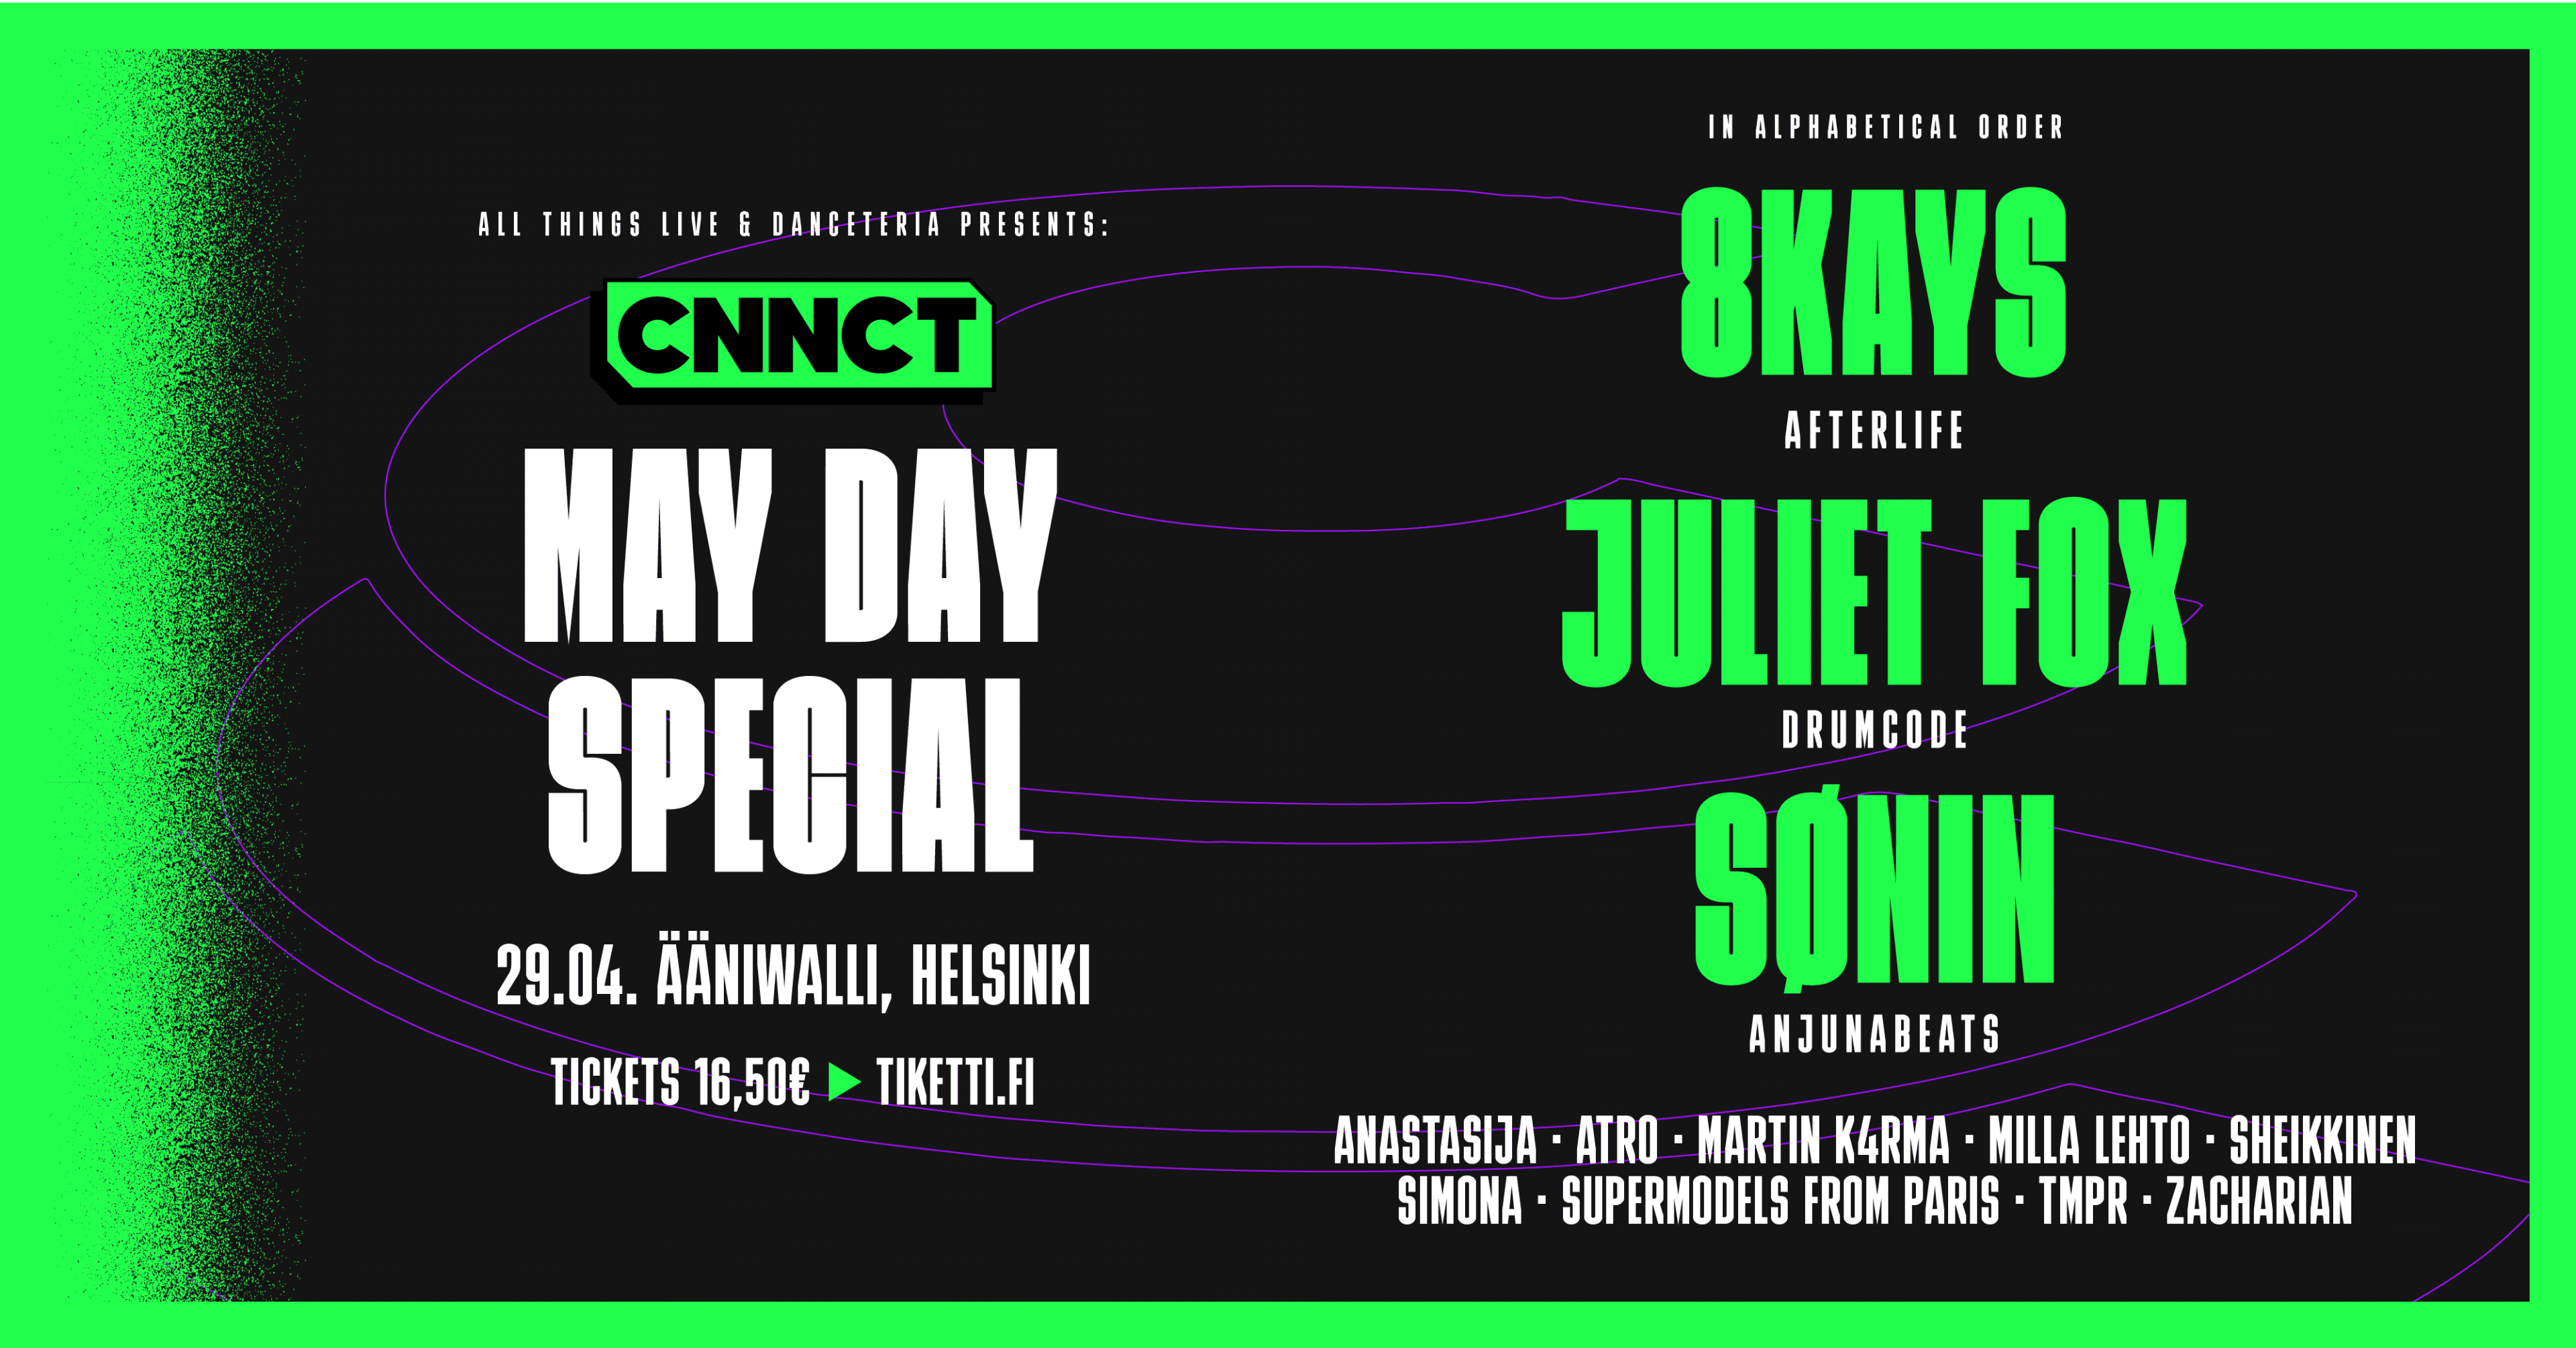 CNNCT May Day Special with 8kays, juliet fox and Sonin